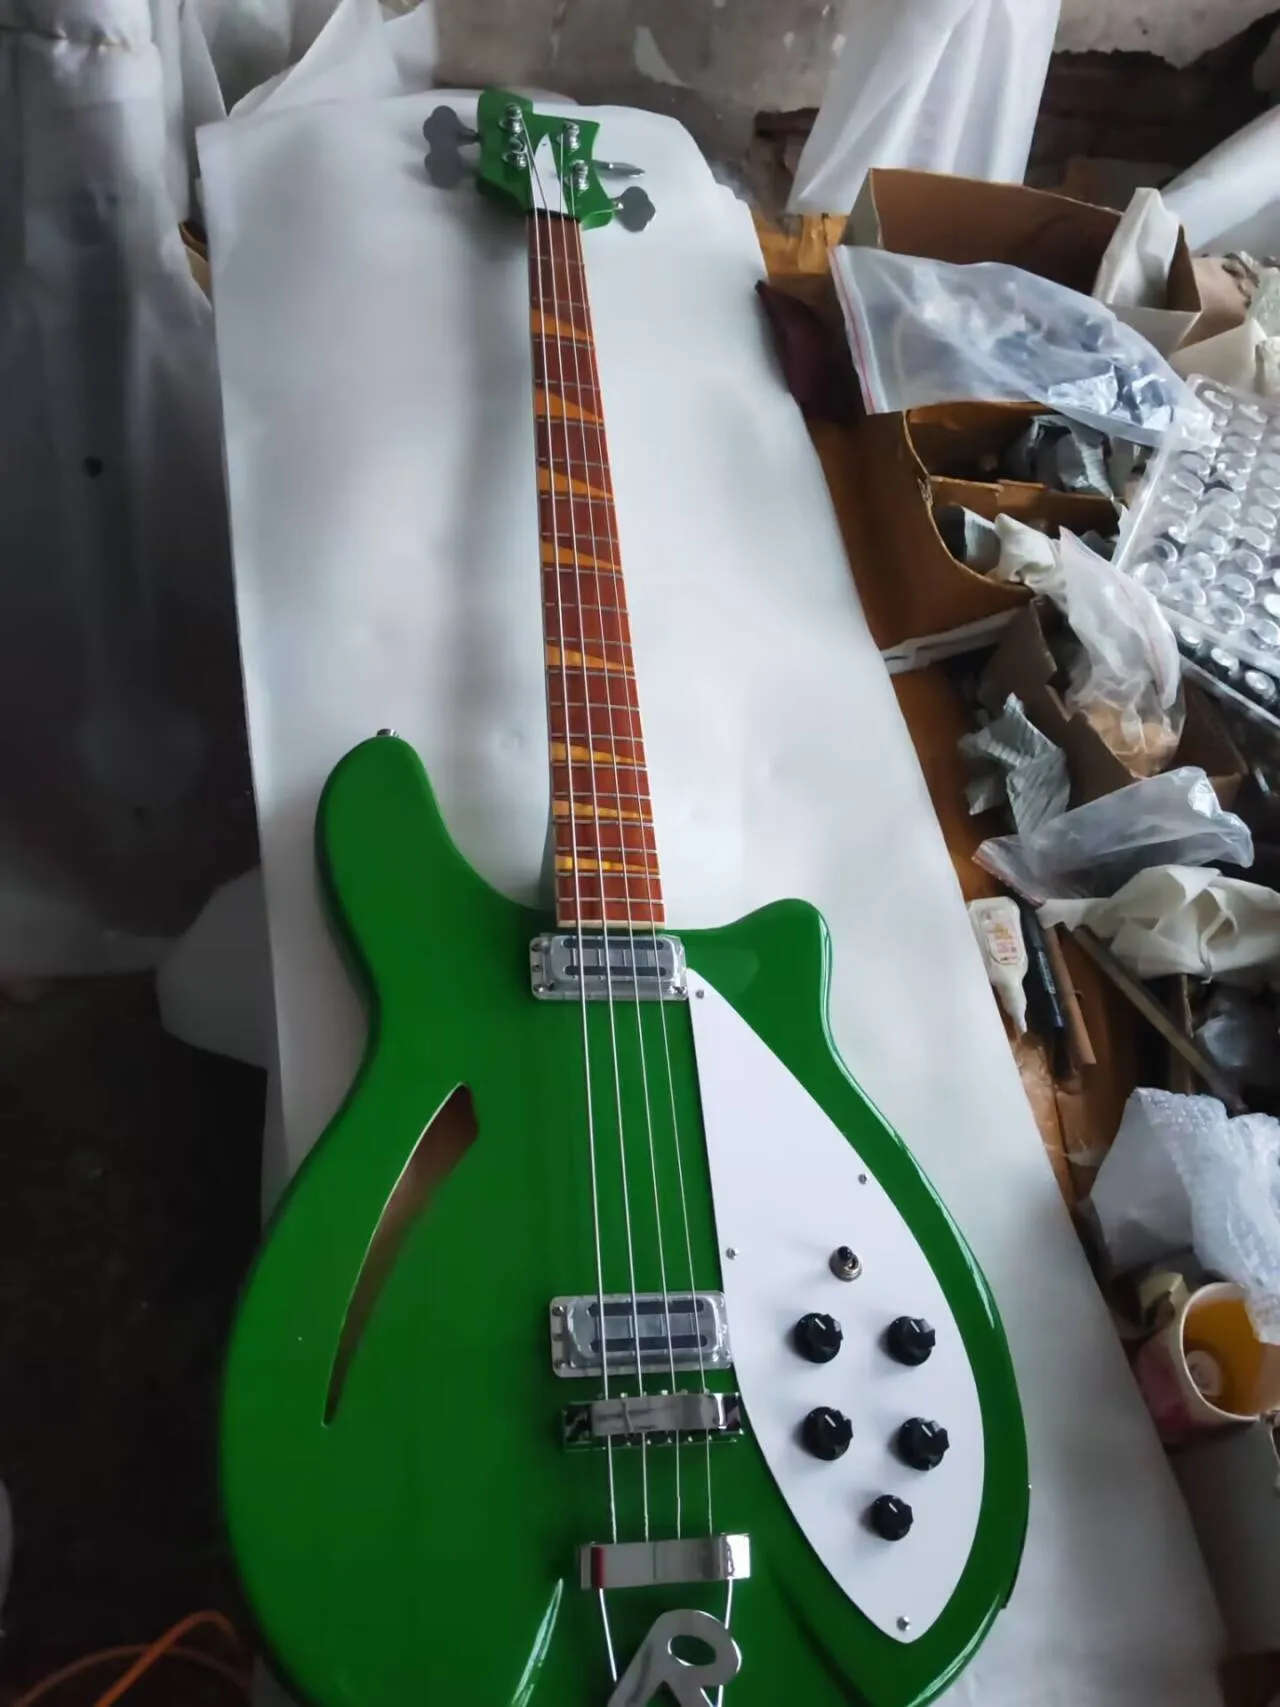 4 String Enterirc Bass Guitar Semie Hollow Body Two Toaster Ric Pickups 21 Frets Green Professional Bass Guitar